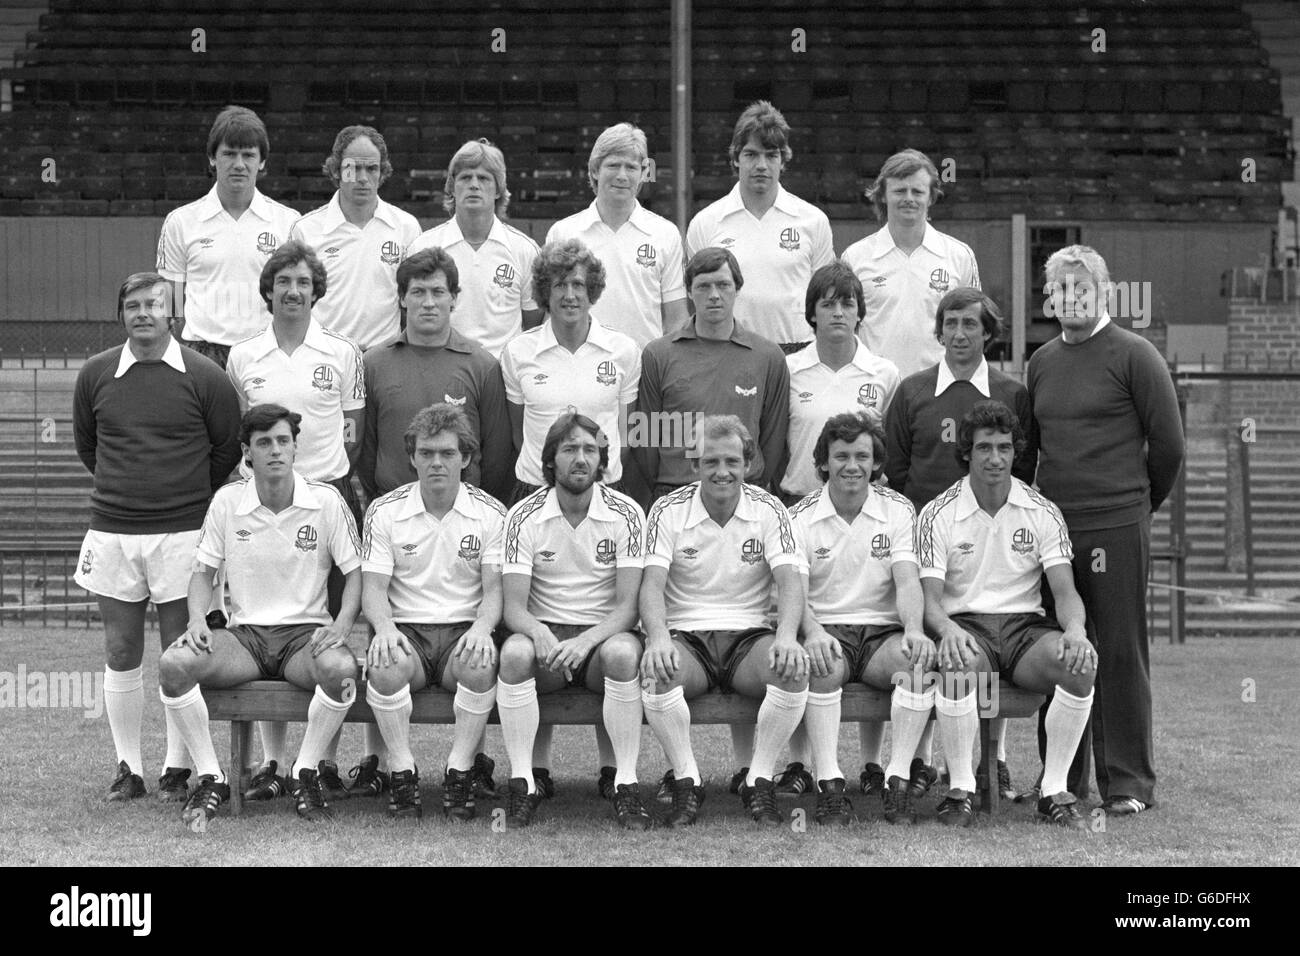 Bolton Wanderers FC for the 1979-80 season. Back row: (l-r) Paul Jones, Tadeusz Nowak, Len Cantello, Mike Walsh, Sam Allardyce and Neil McNab. Middle row: (l-r) Stan Anderson (assistant manager), Peter Nicholson, Jim McDonagh, Alan Gowling, Terry Poole, Mike Graham, Jim Headrige (physiotherapist) and manager Ian Greaves. Front row: (l-r) David Burke, Brian Smith, Roy Greaves, Neil Whatmore, Peter Reid and Dave Clement. Stock Photo